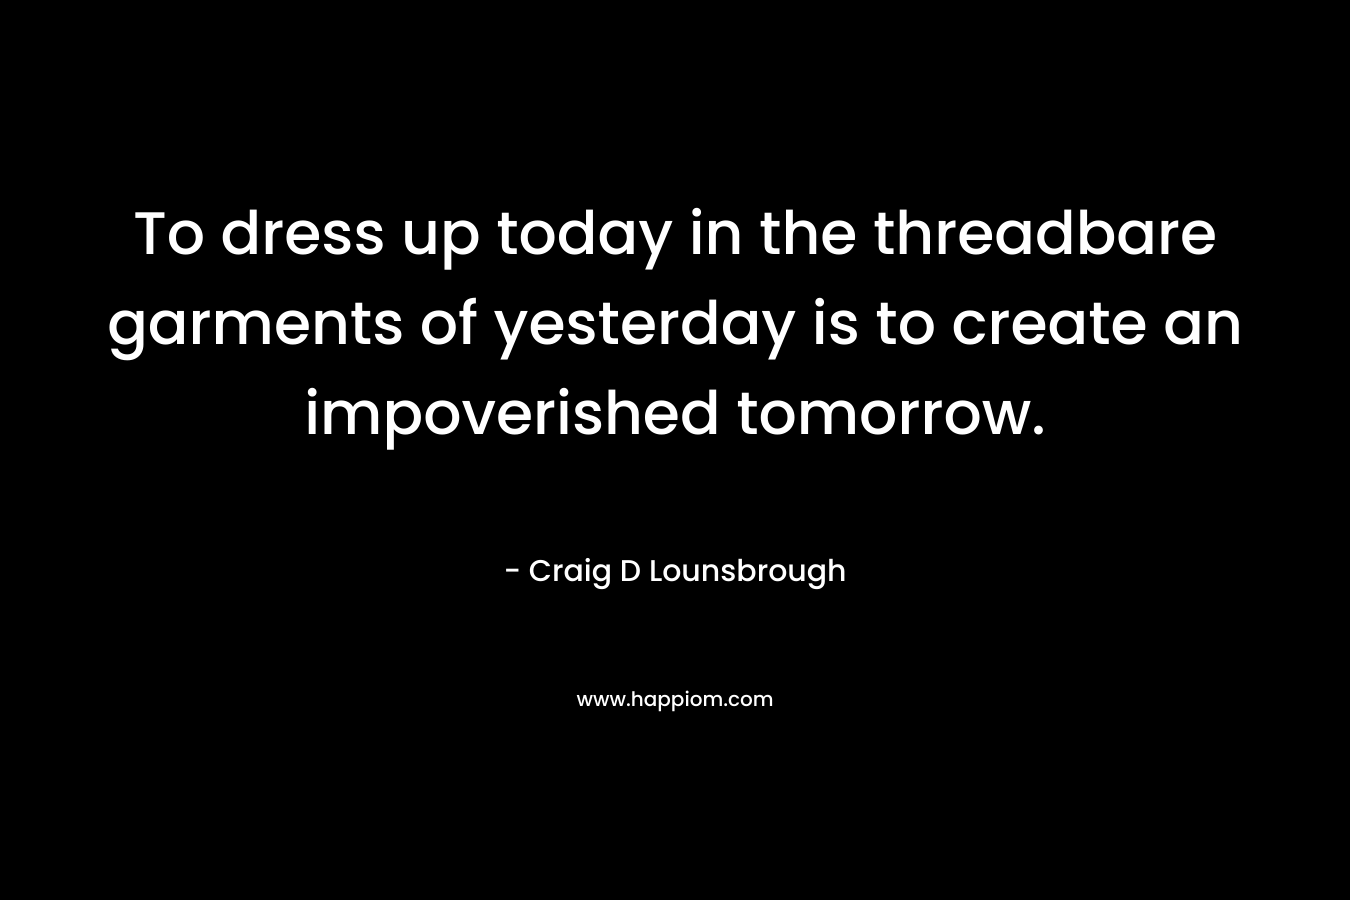 To dress up today in the threadbare garments of yesterday is to create an impoverished tomorrow. – Craig D Lounsbrough